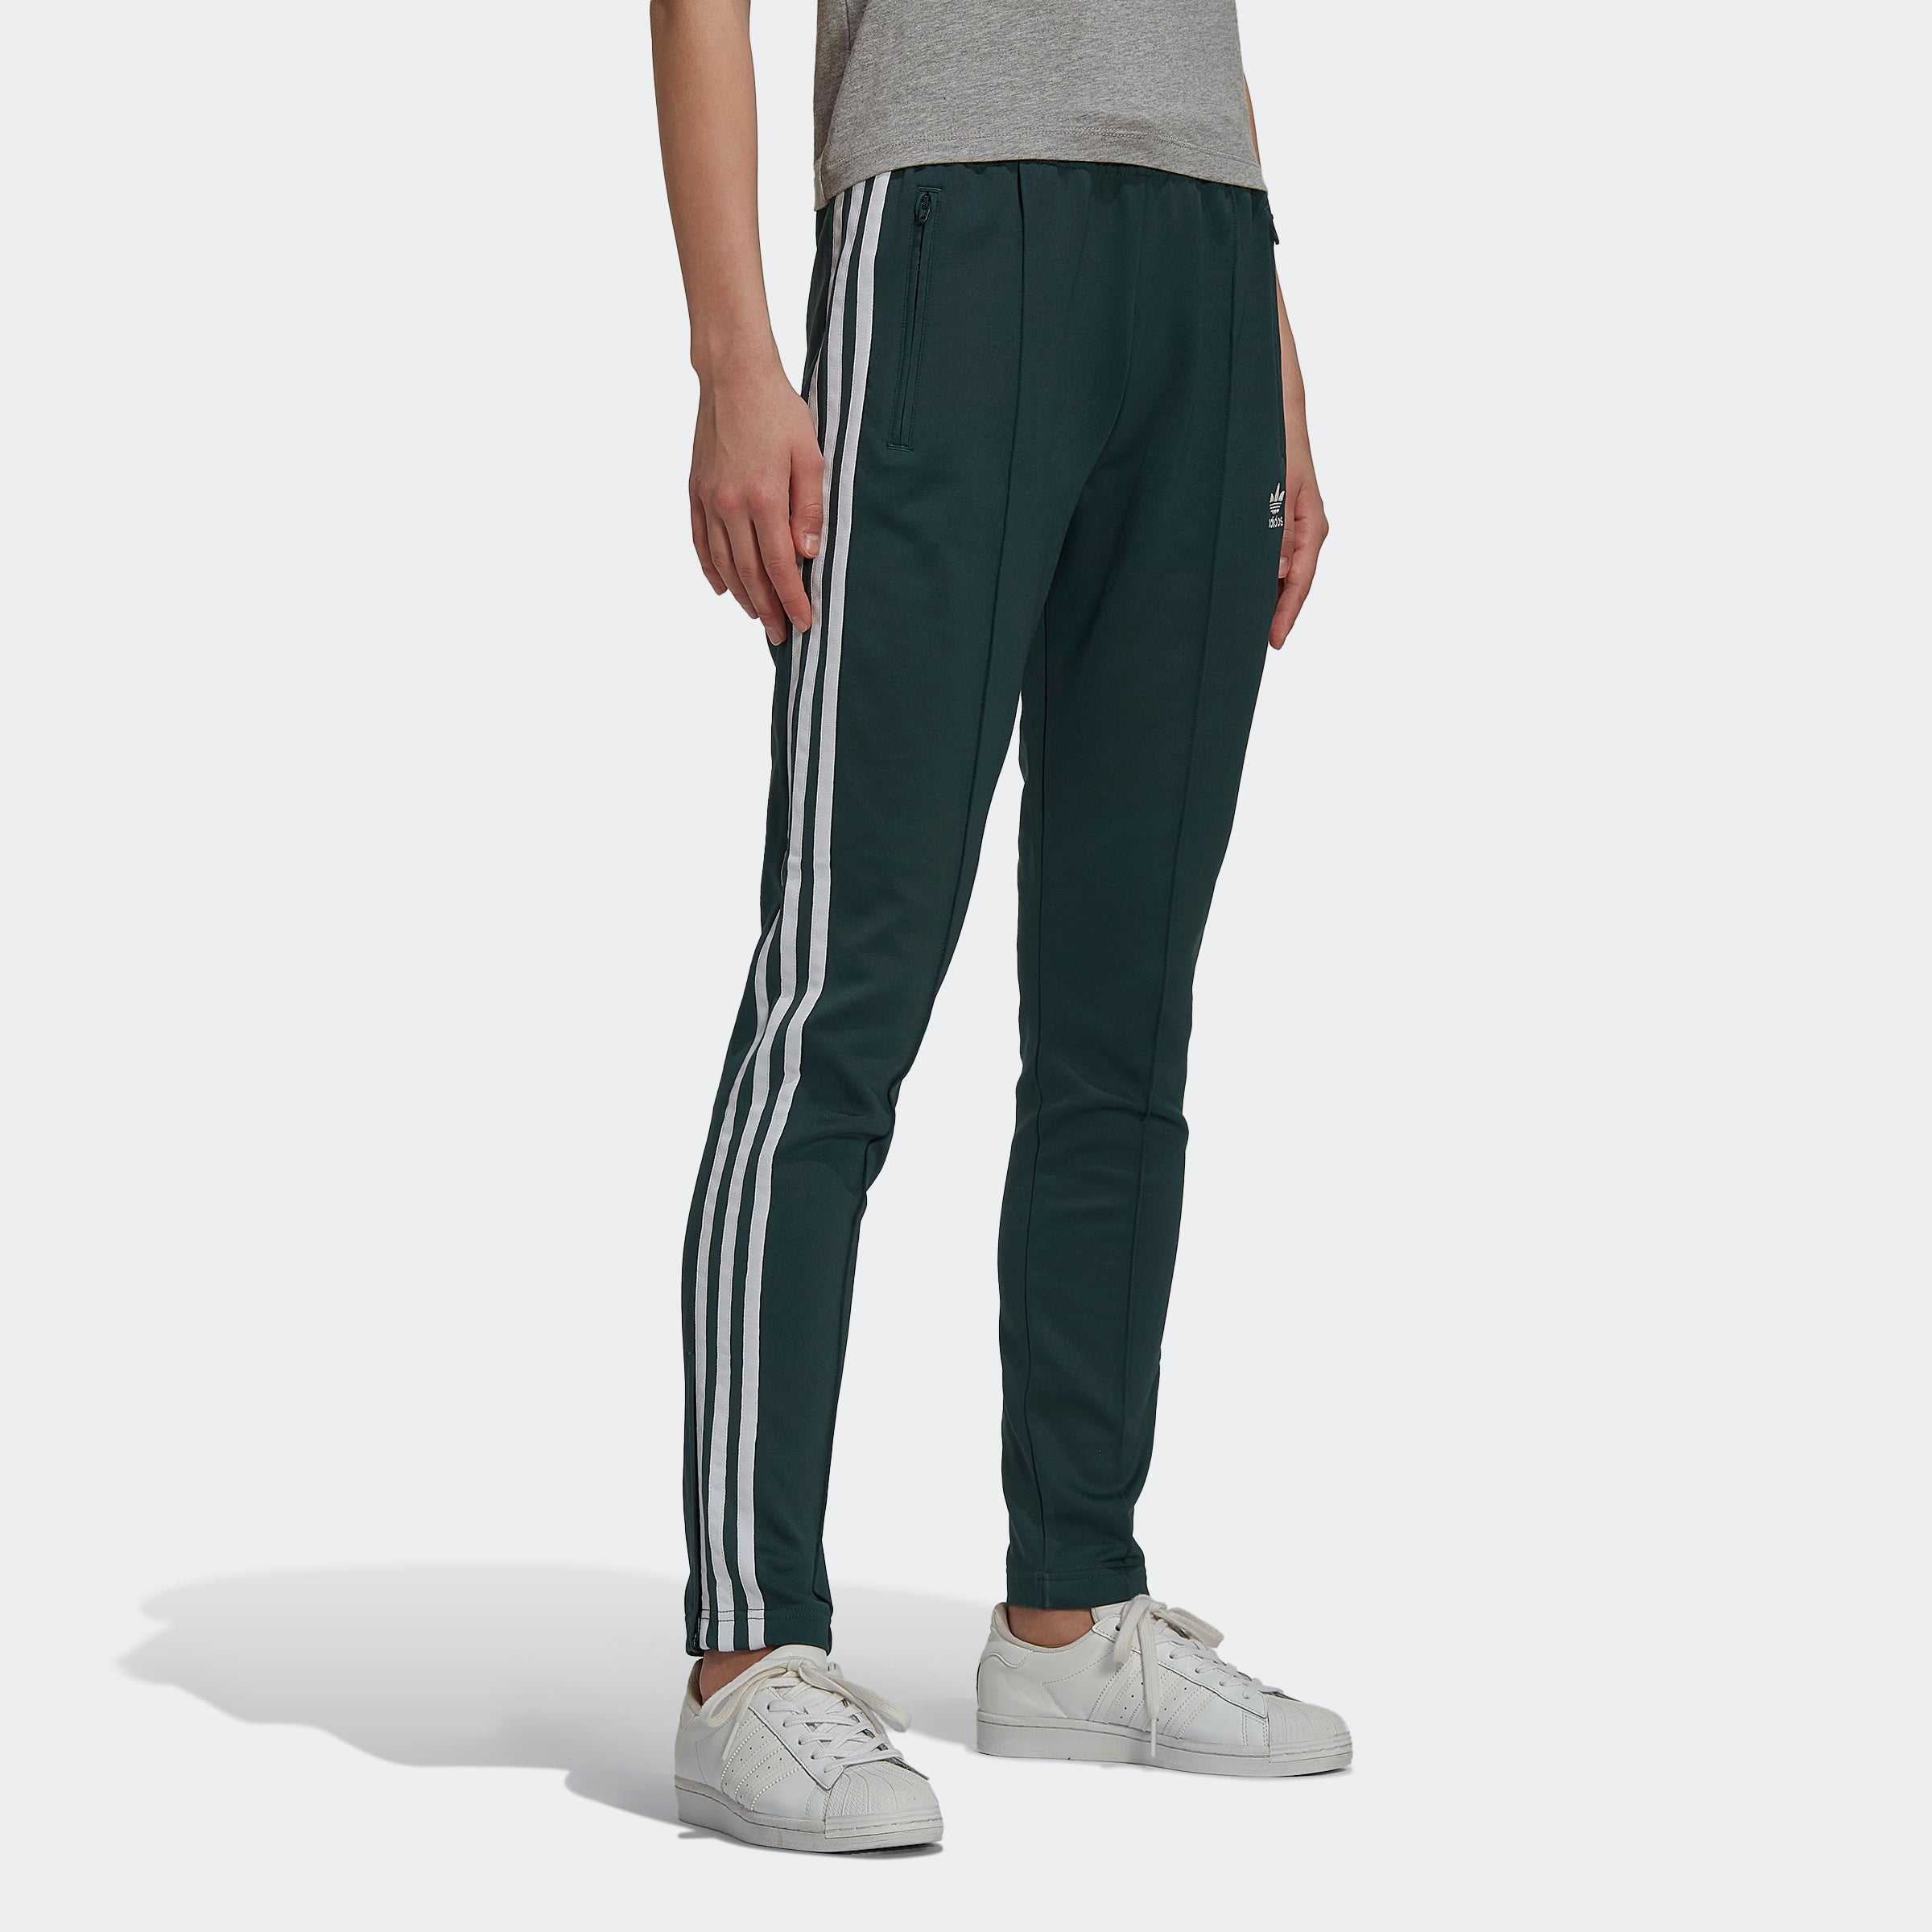 Chicago City Mineral SST Women\'s | Pants Green adidas Track Sports